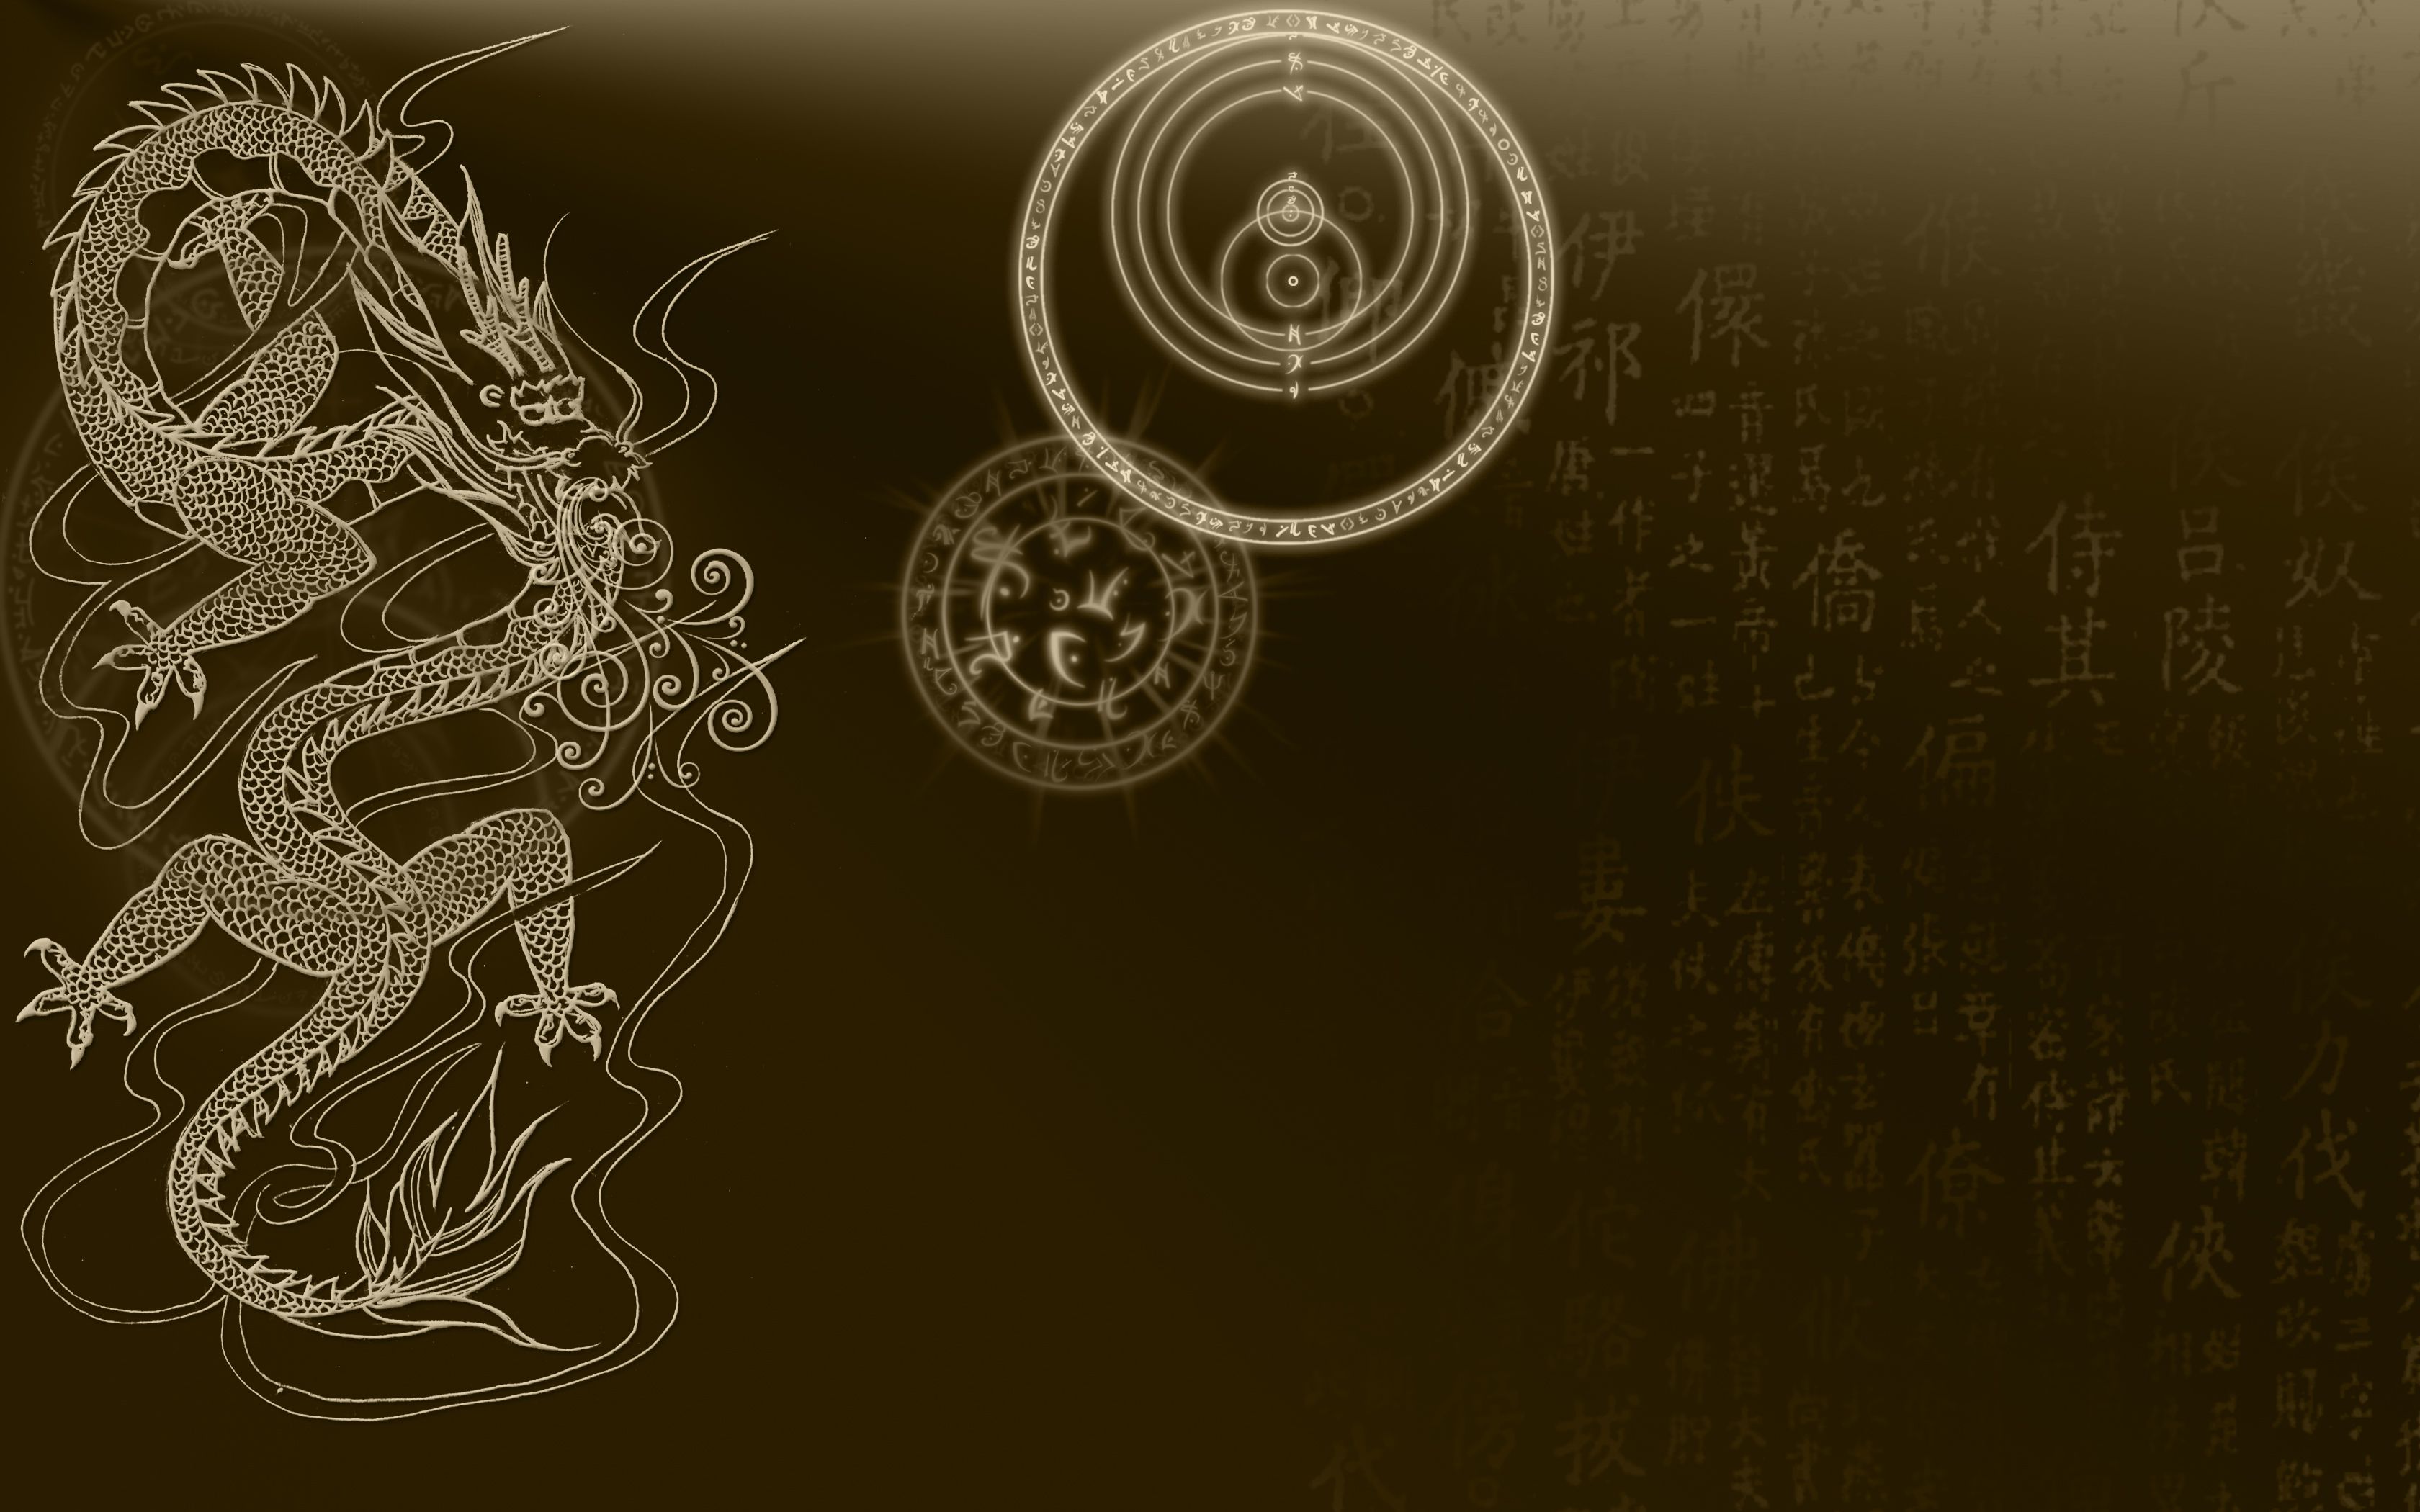 Free download Chinese Dragons wallpaper Chinese Dragons background [3360x2100] for your Desktop, Mobile & Tablet. Explore Japanese Dragon Wallpaper. Chinese Dragon Wallpaper, Free Dragons Wallpaper, 3D Dragon Desktop Wallpaper